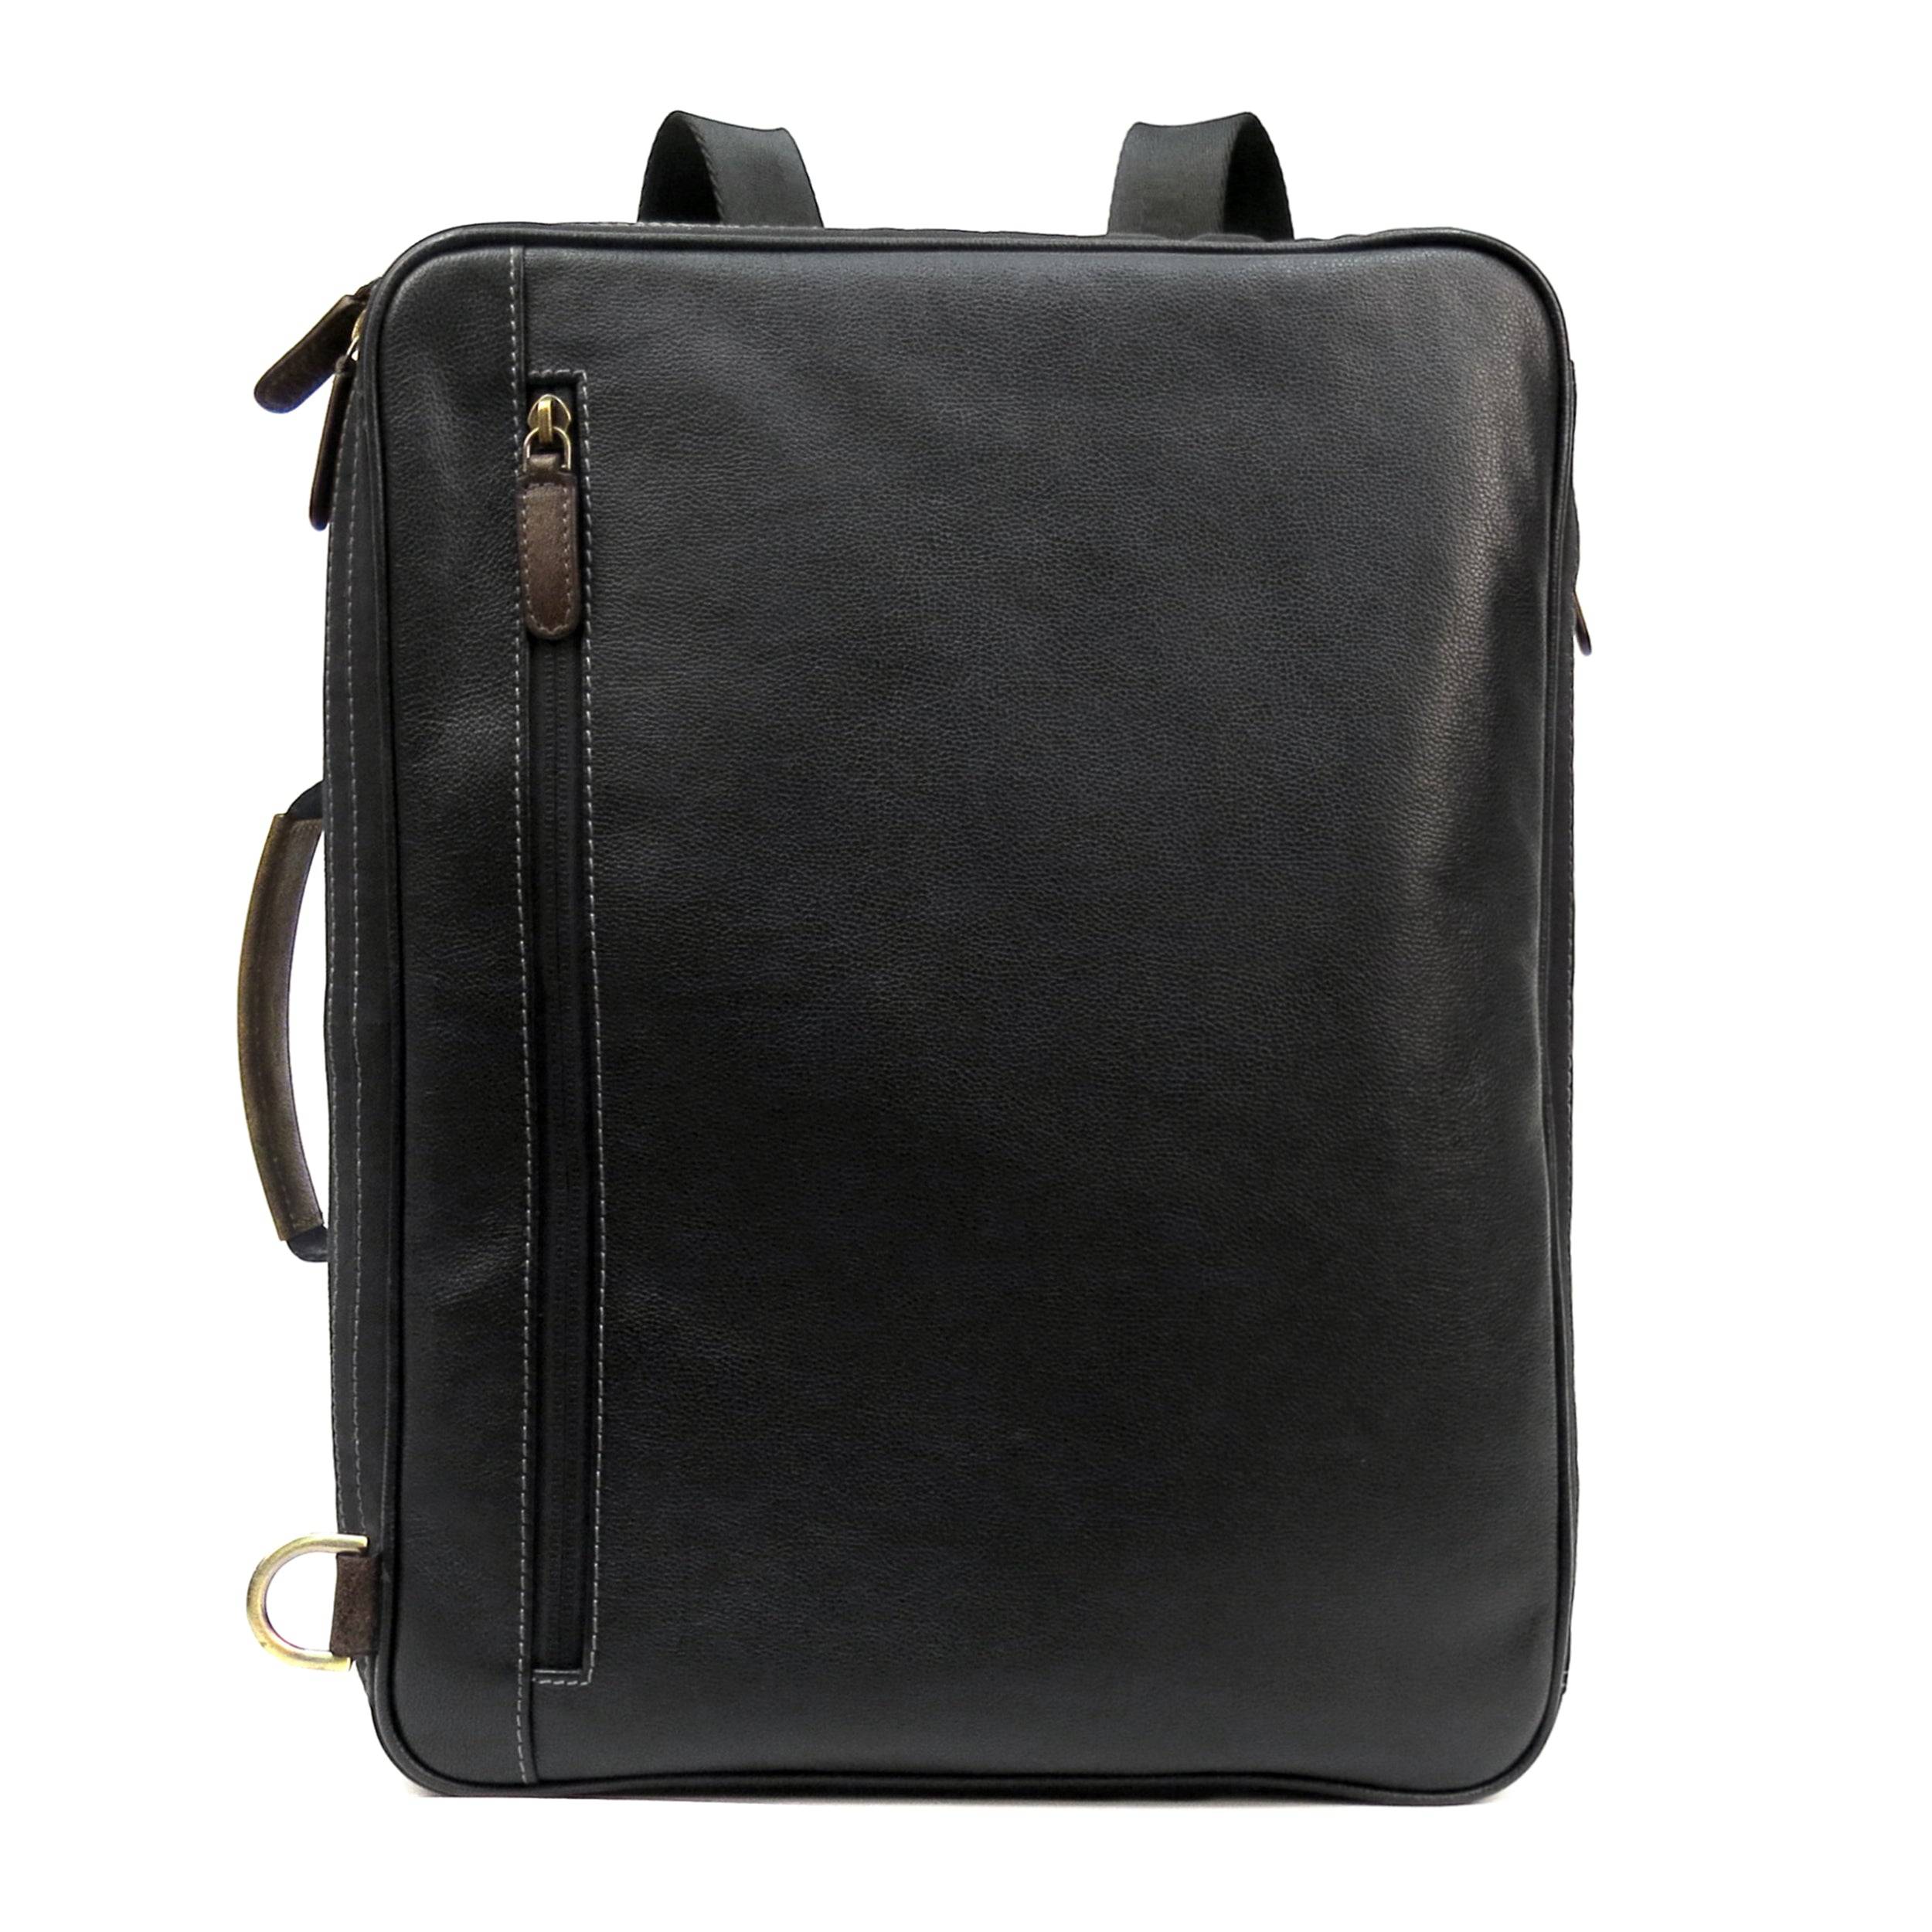 a black backpack with a zipper on the side